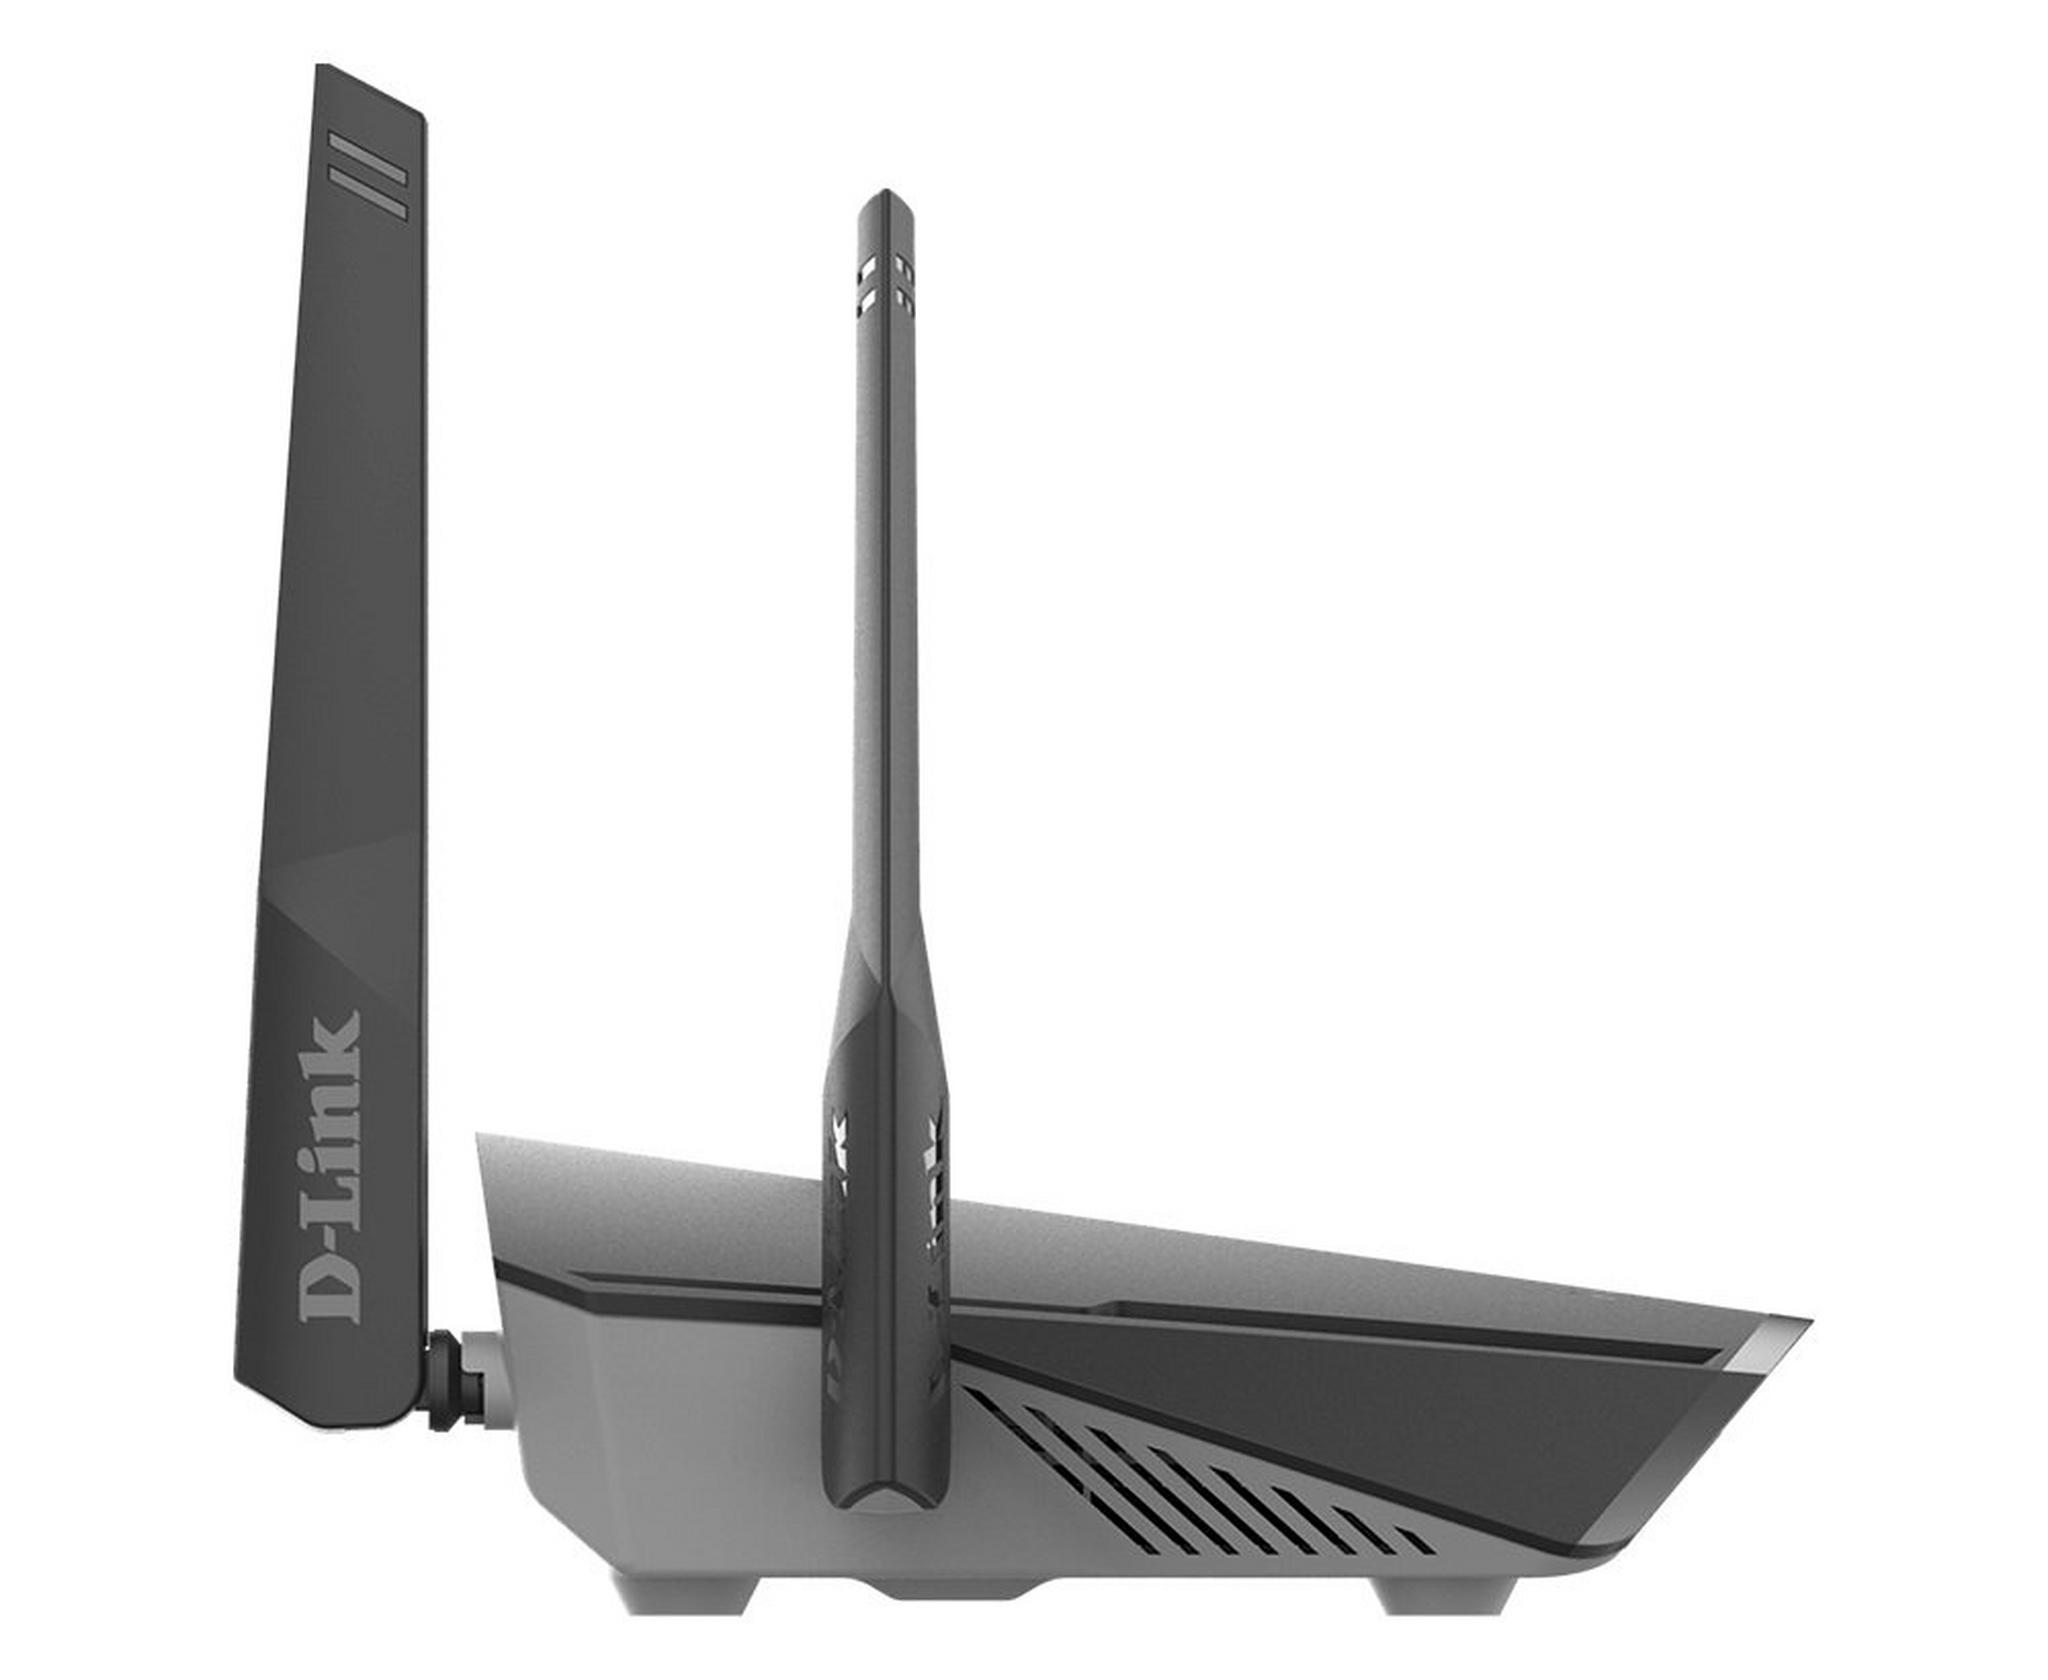 Dlink AC1900 300 Mbps 4G LTE Smart Mesh Wi-Fi Router